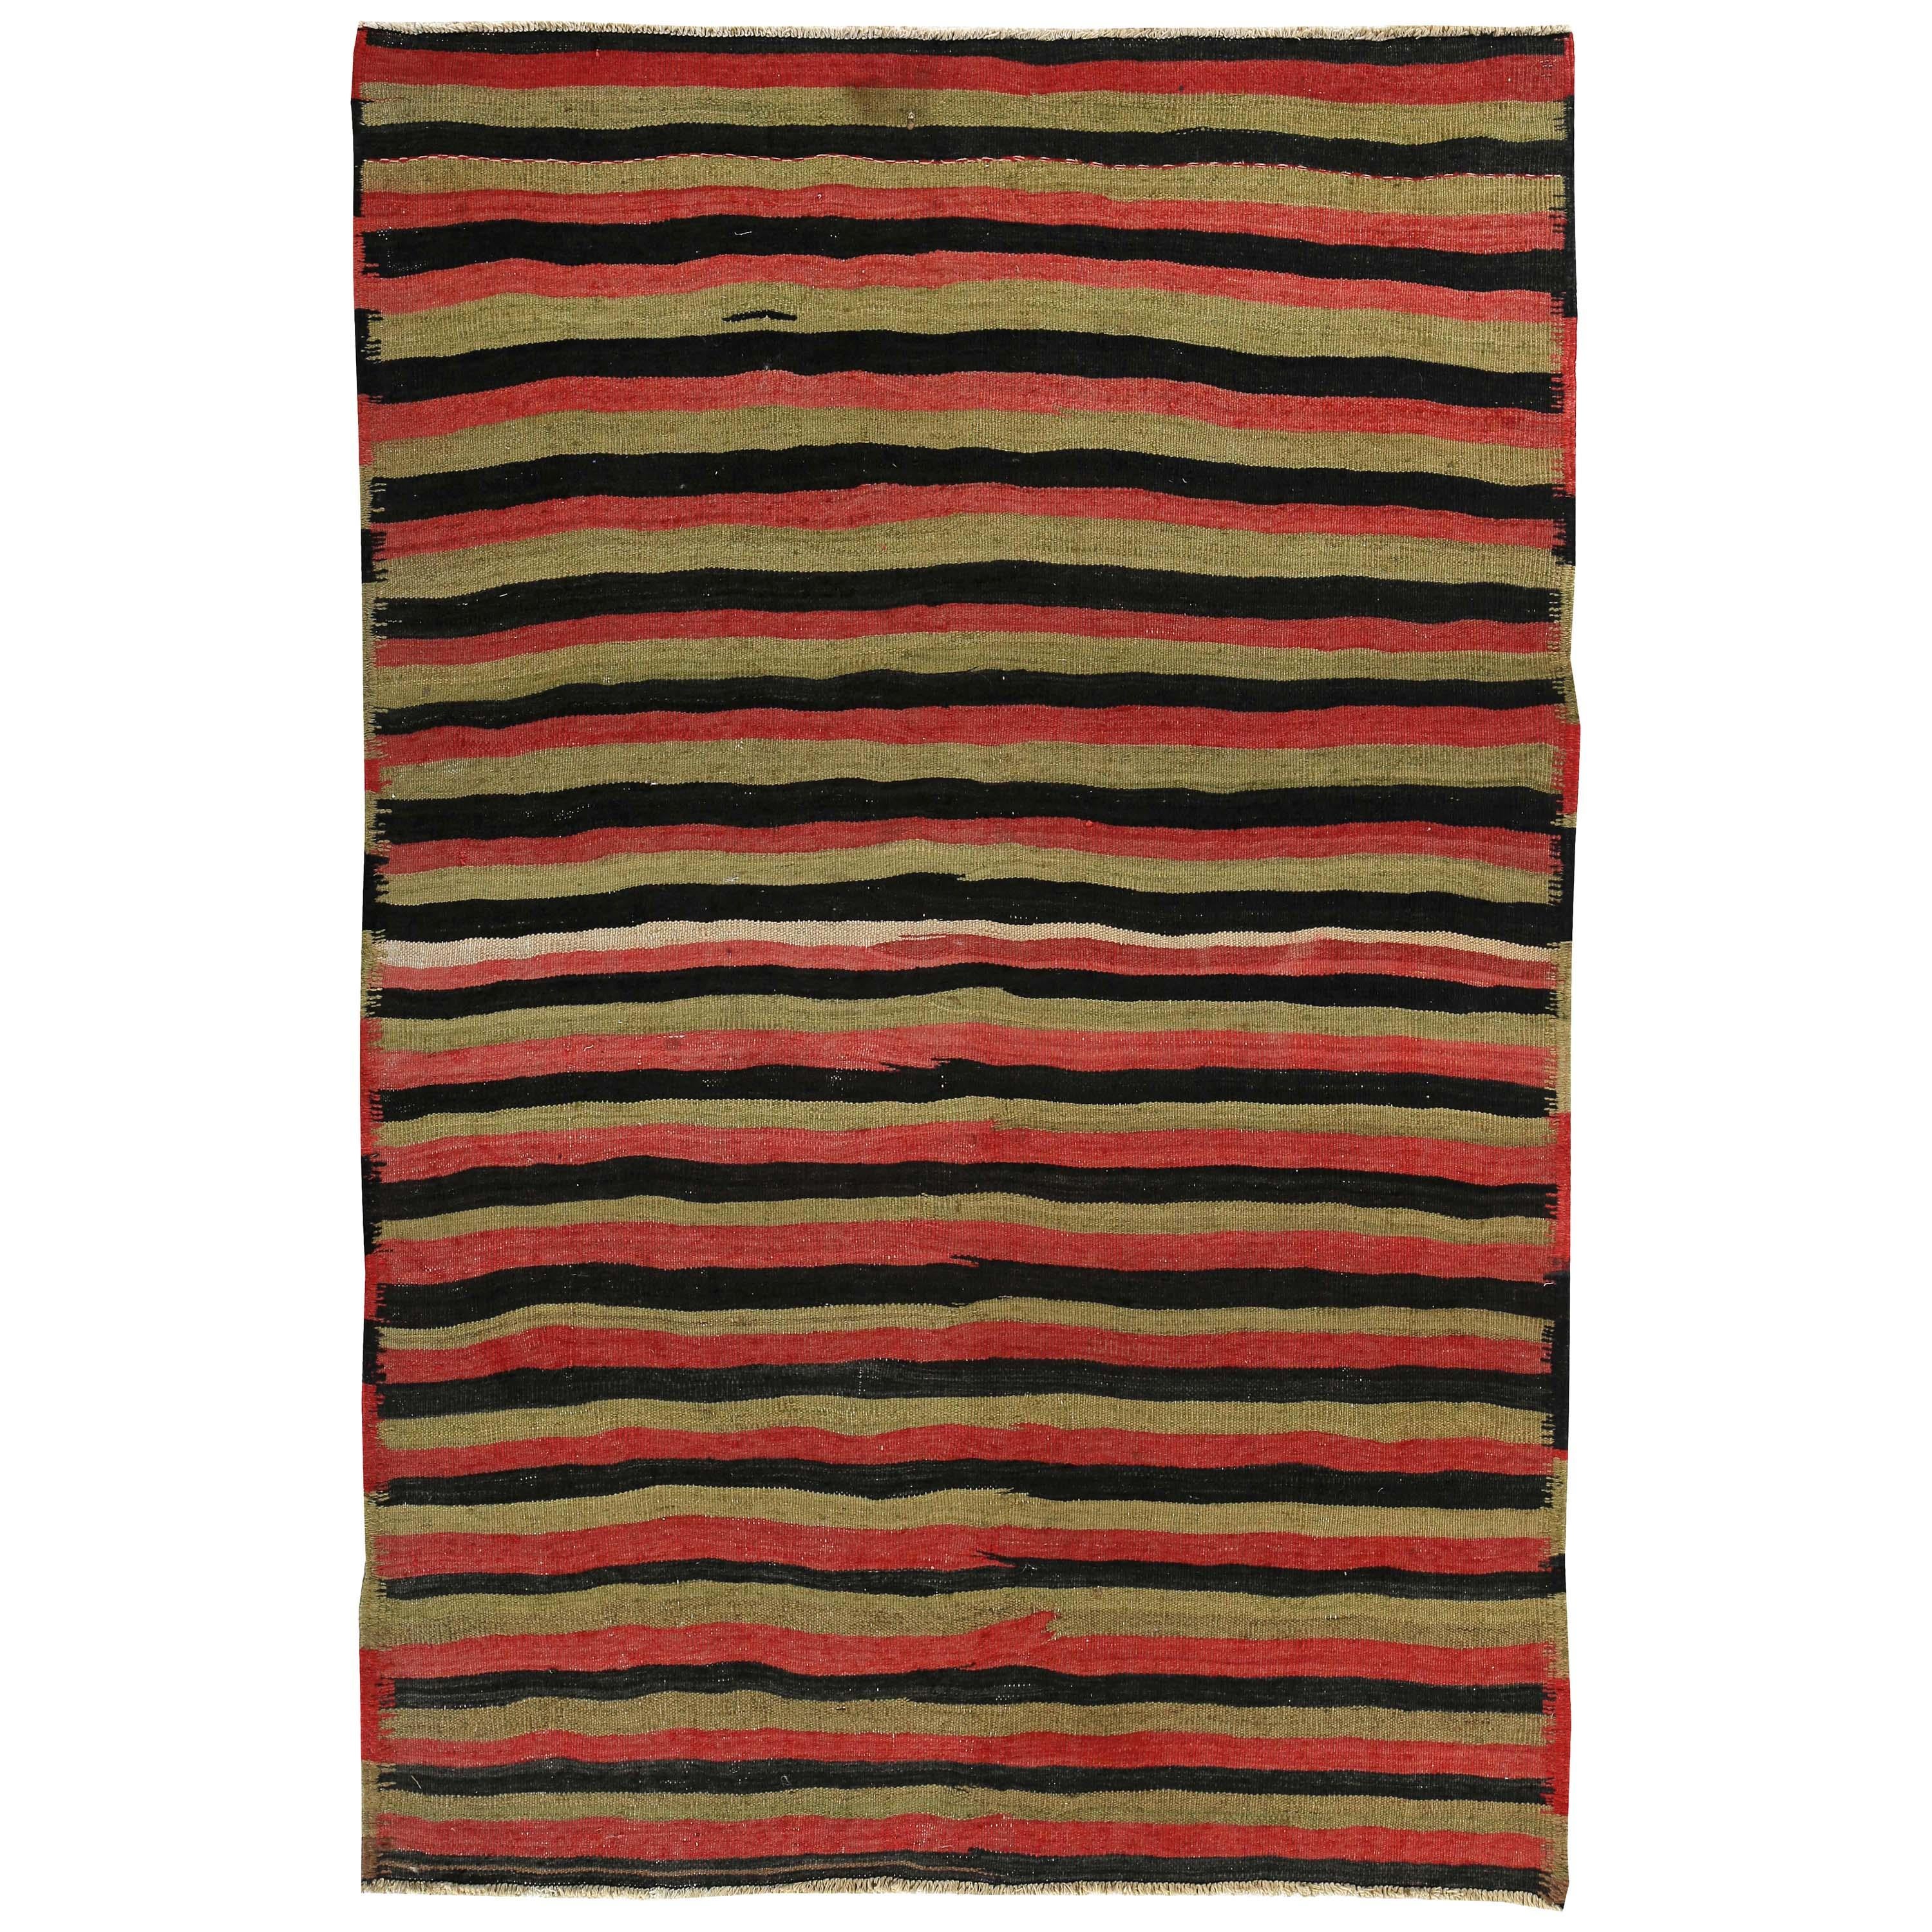 Turkish Kilim Rug with Black and Red Tribal Stripes on Gold Field